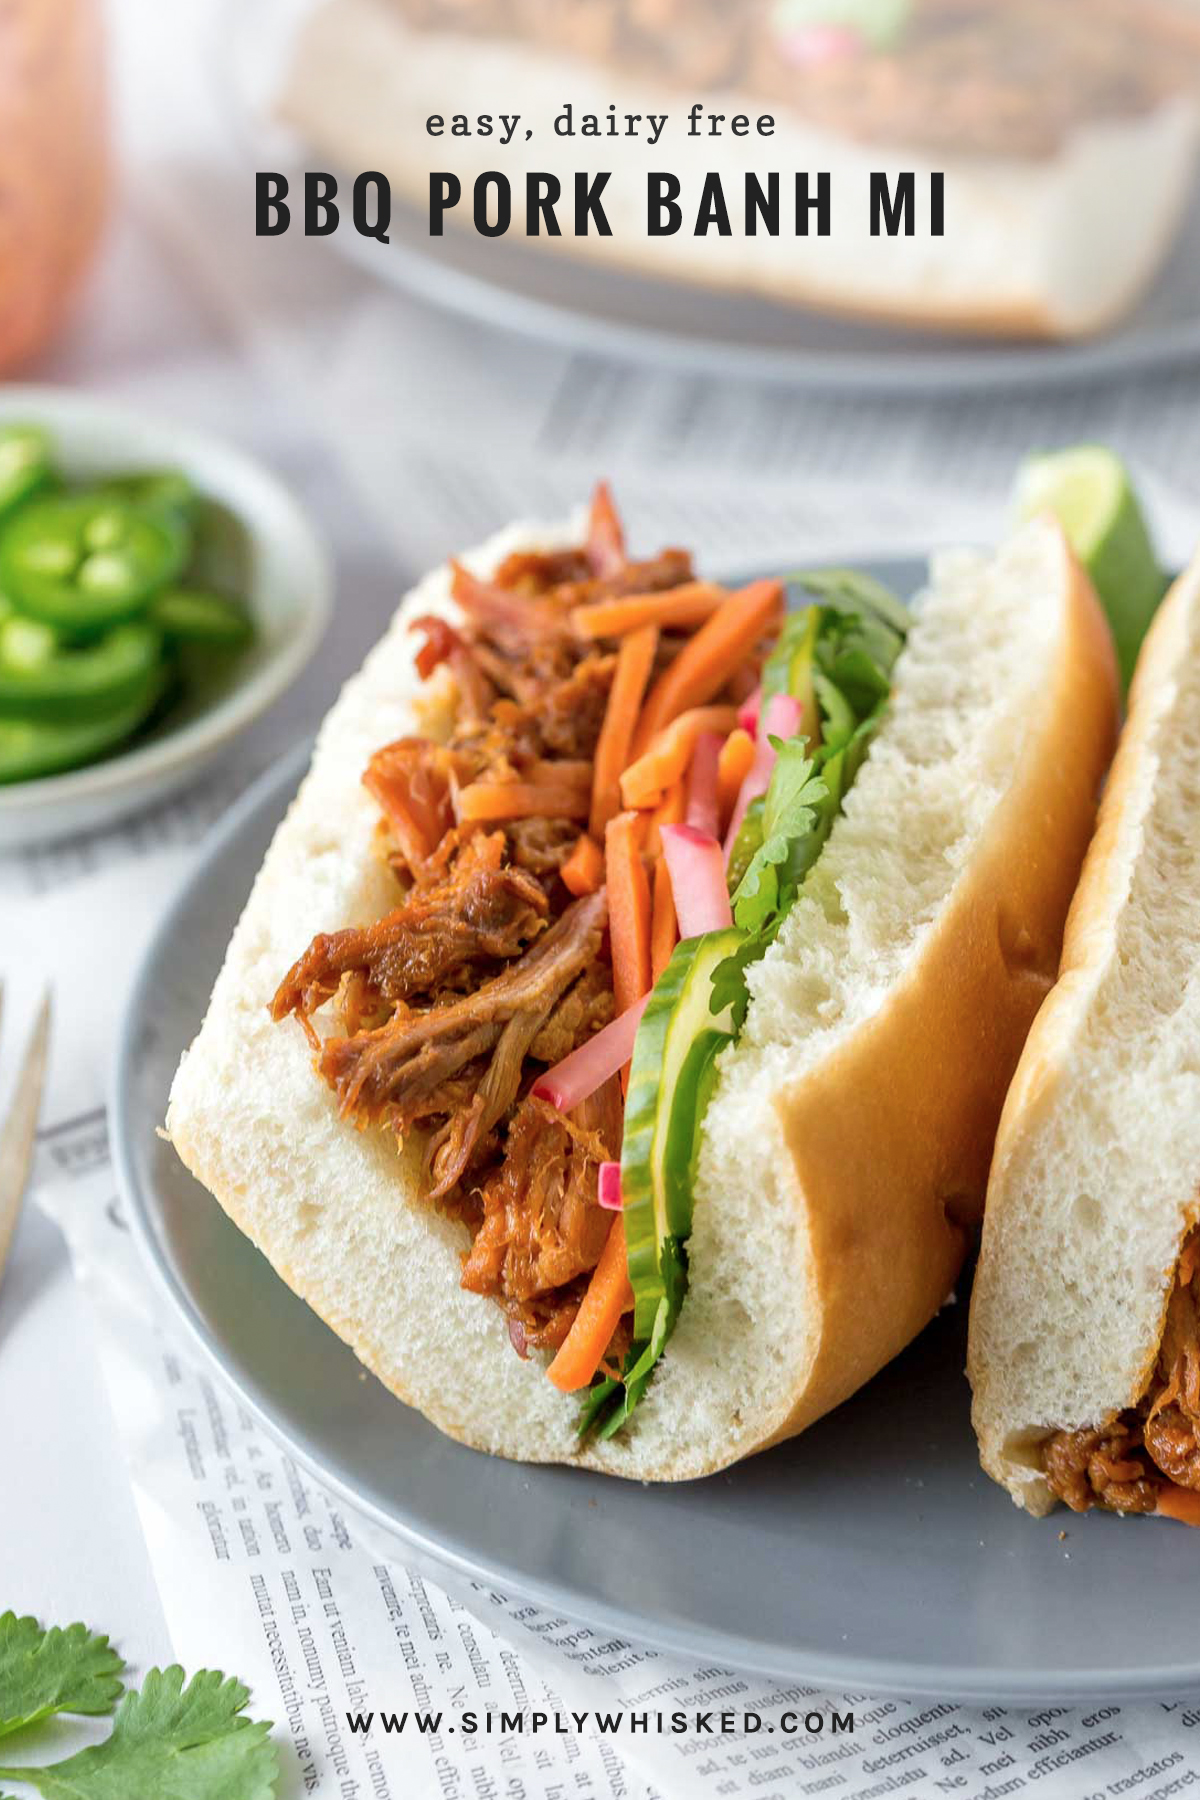 bbq pulled pork banh mi sandwich with pilled carrots and radishes